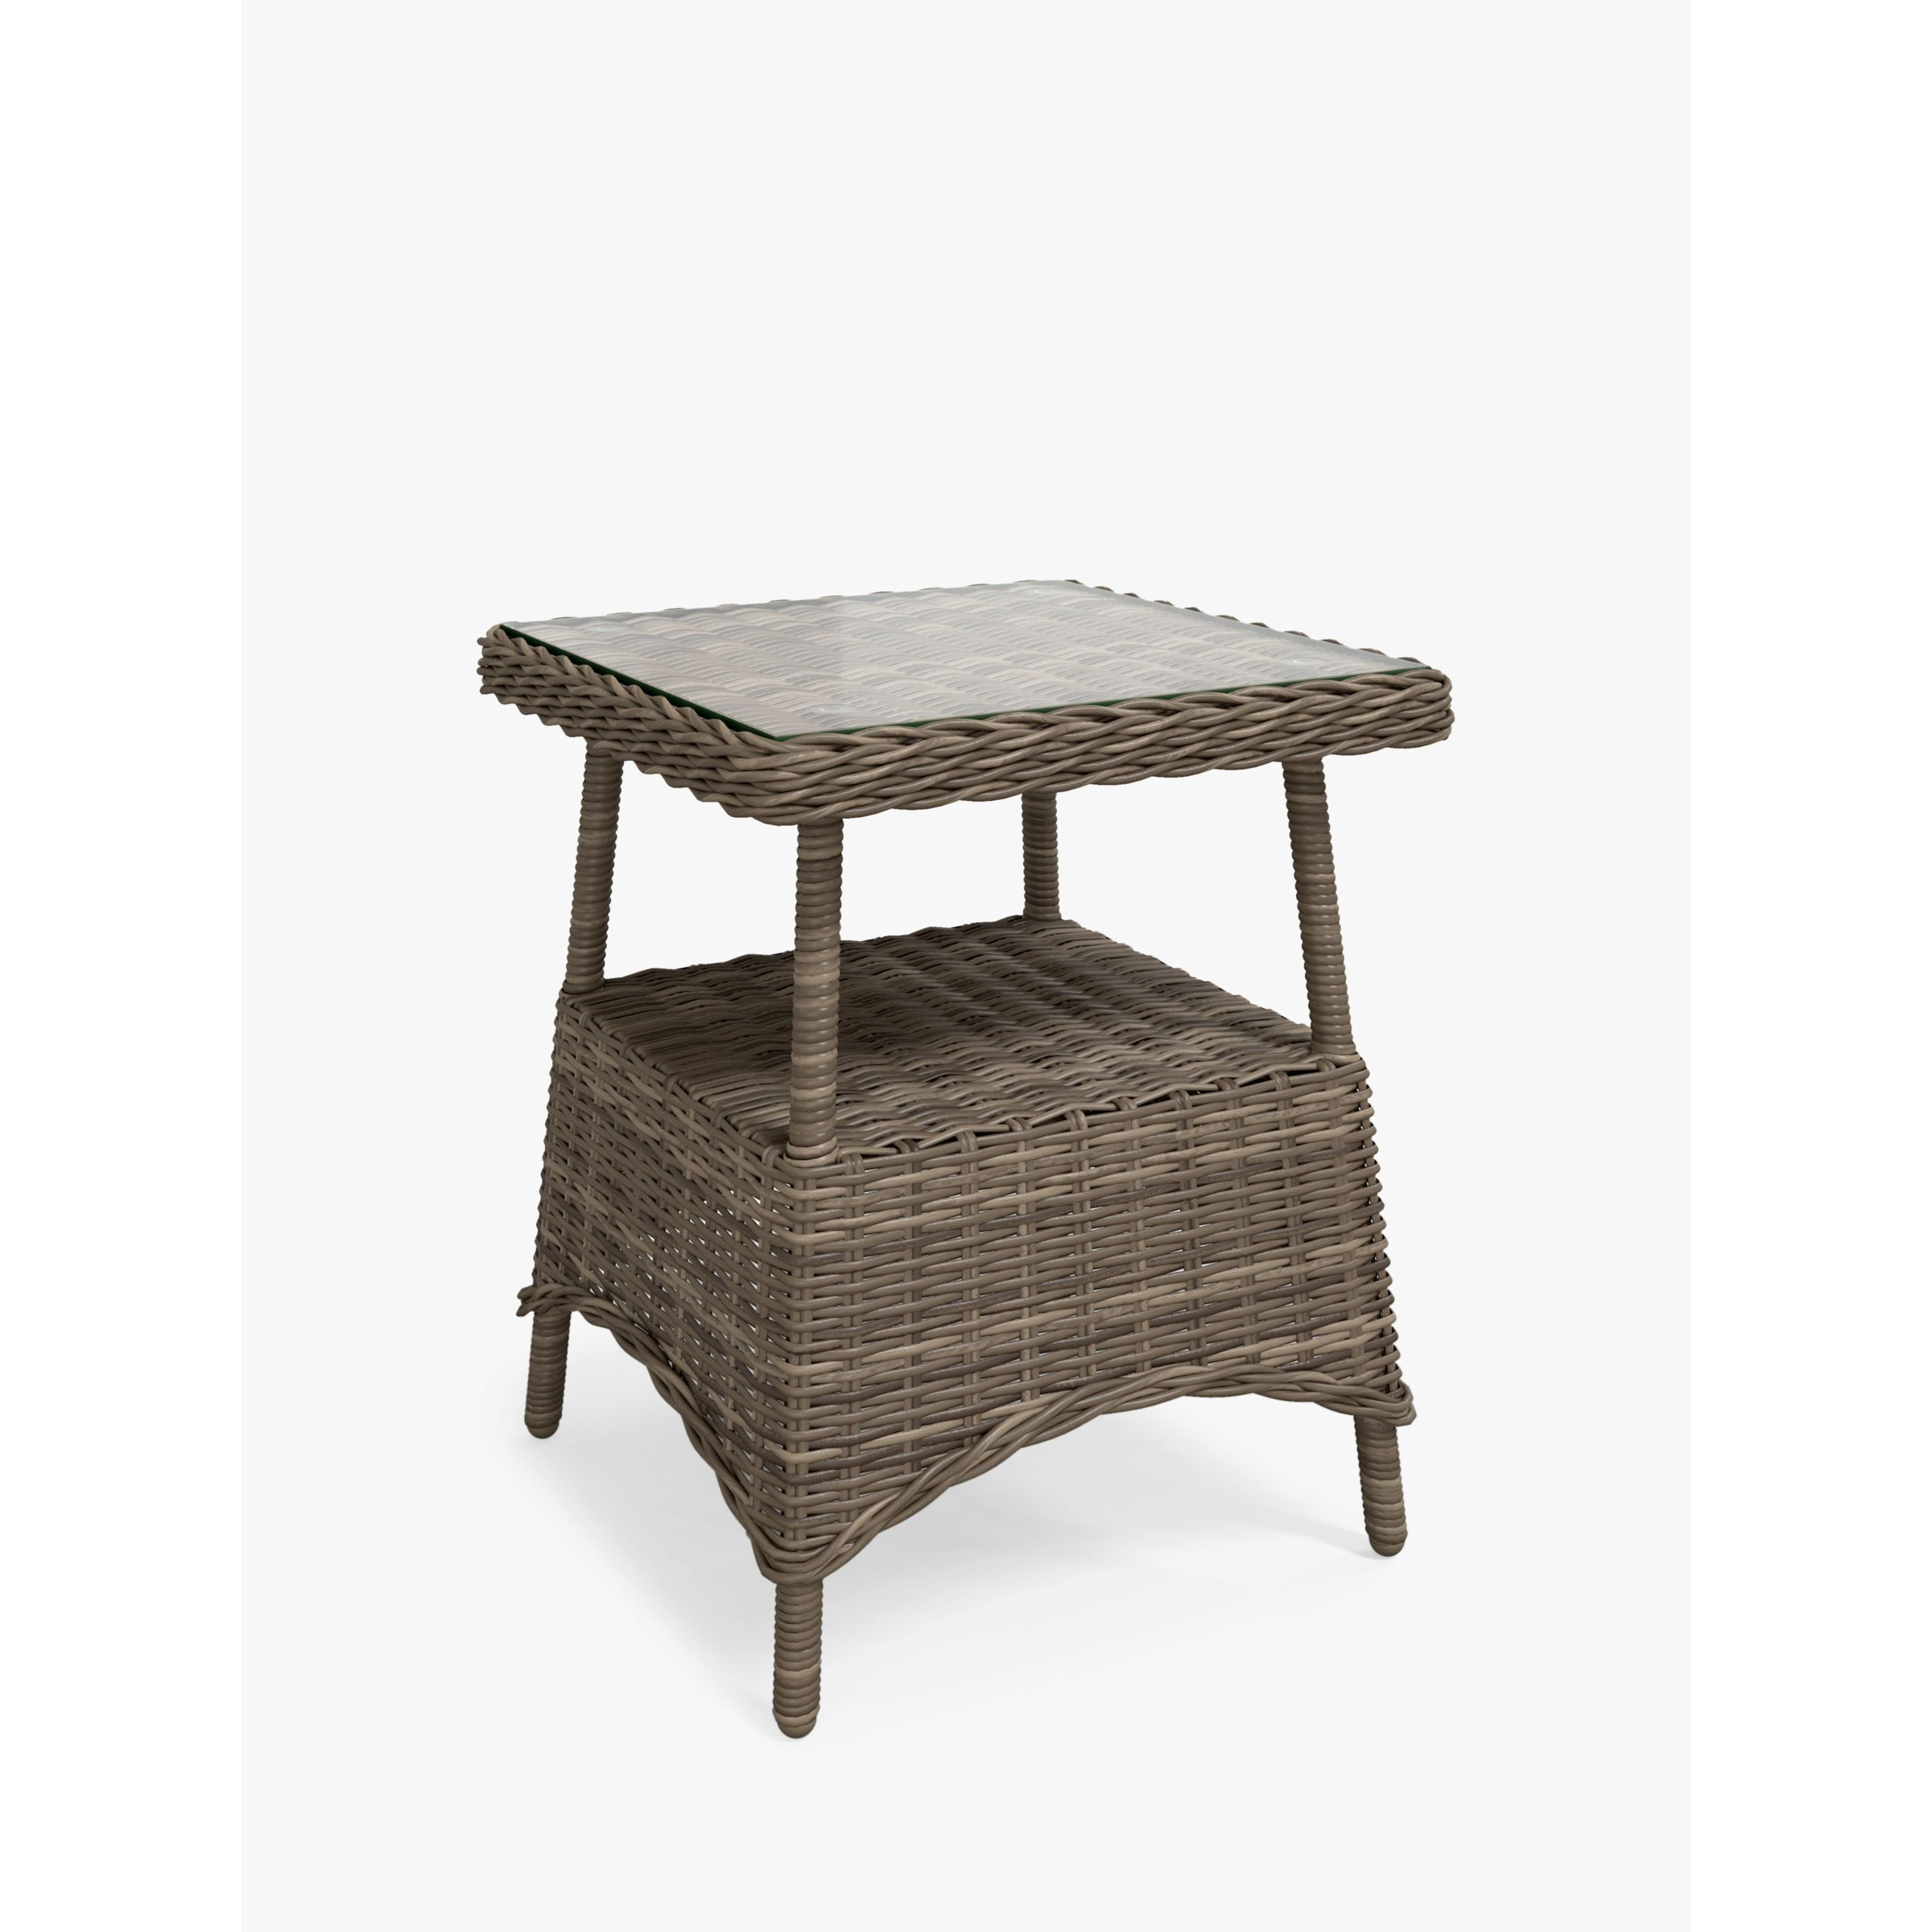 John Lewis Rye Woven Square Garden Side Table, Natural - image 1